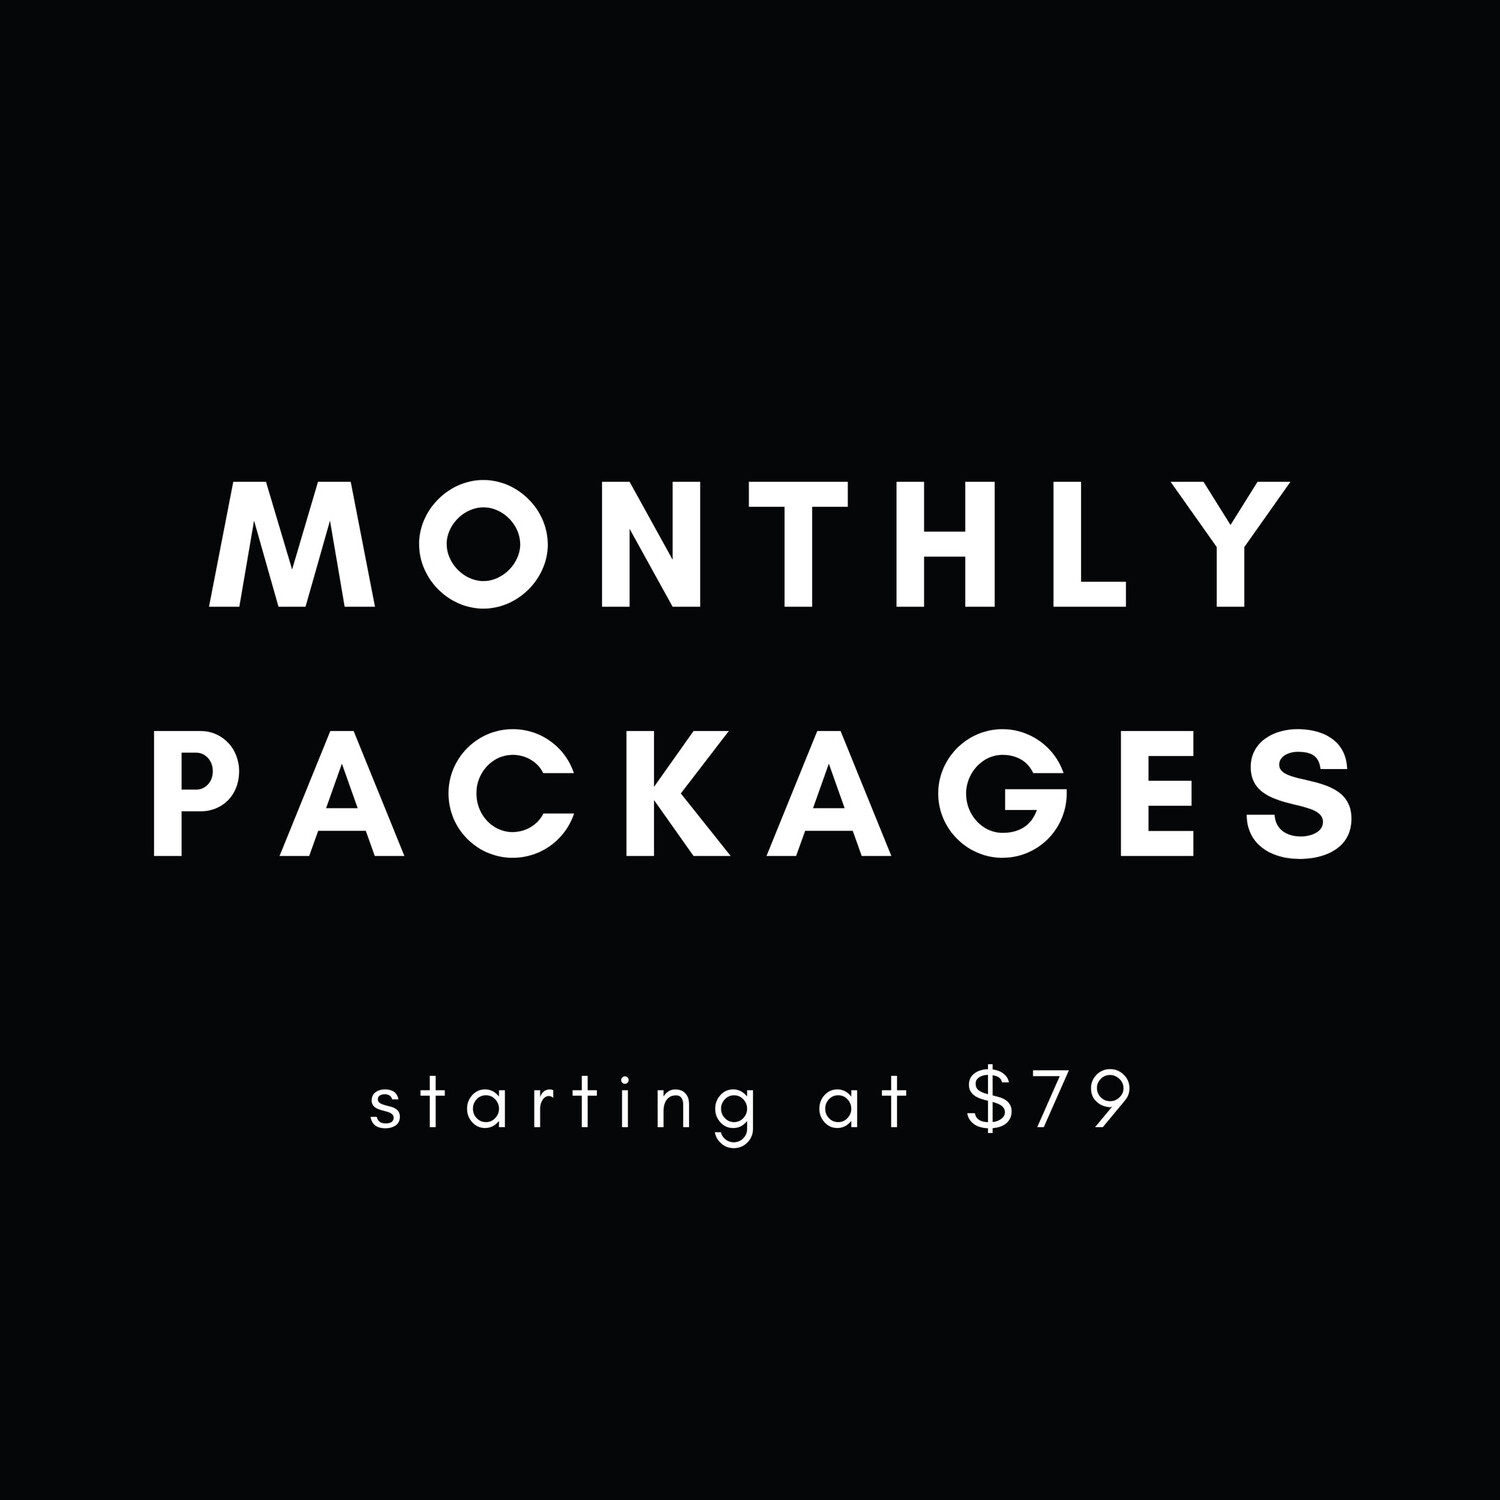 MONTHLY PACKAGES